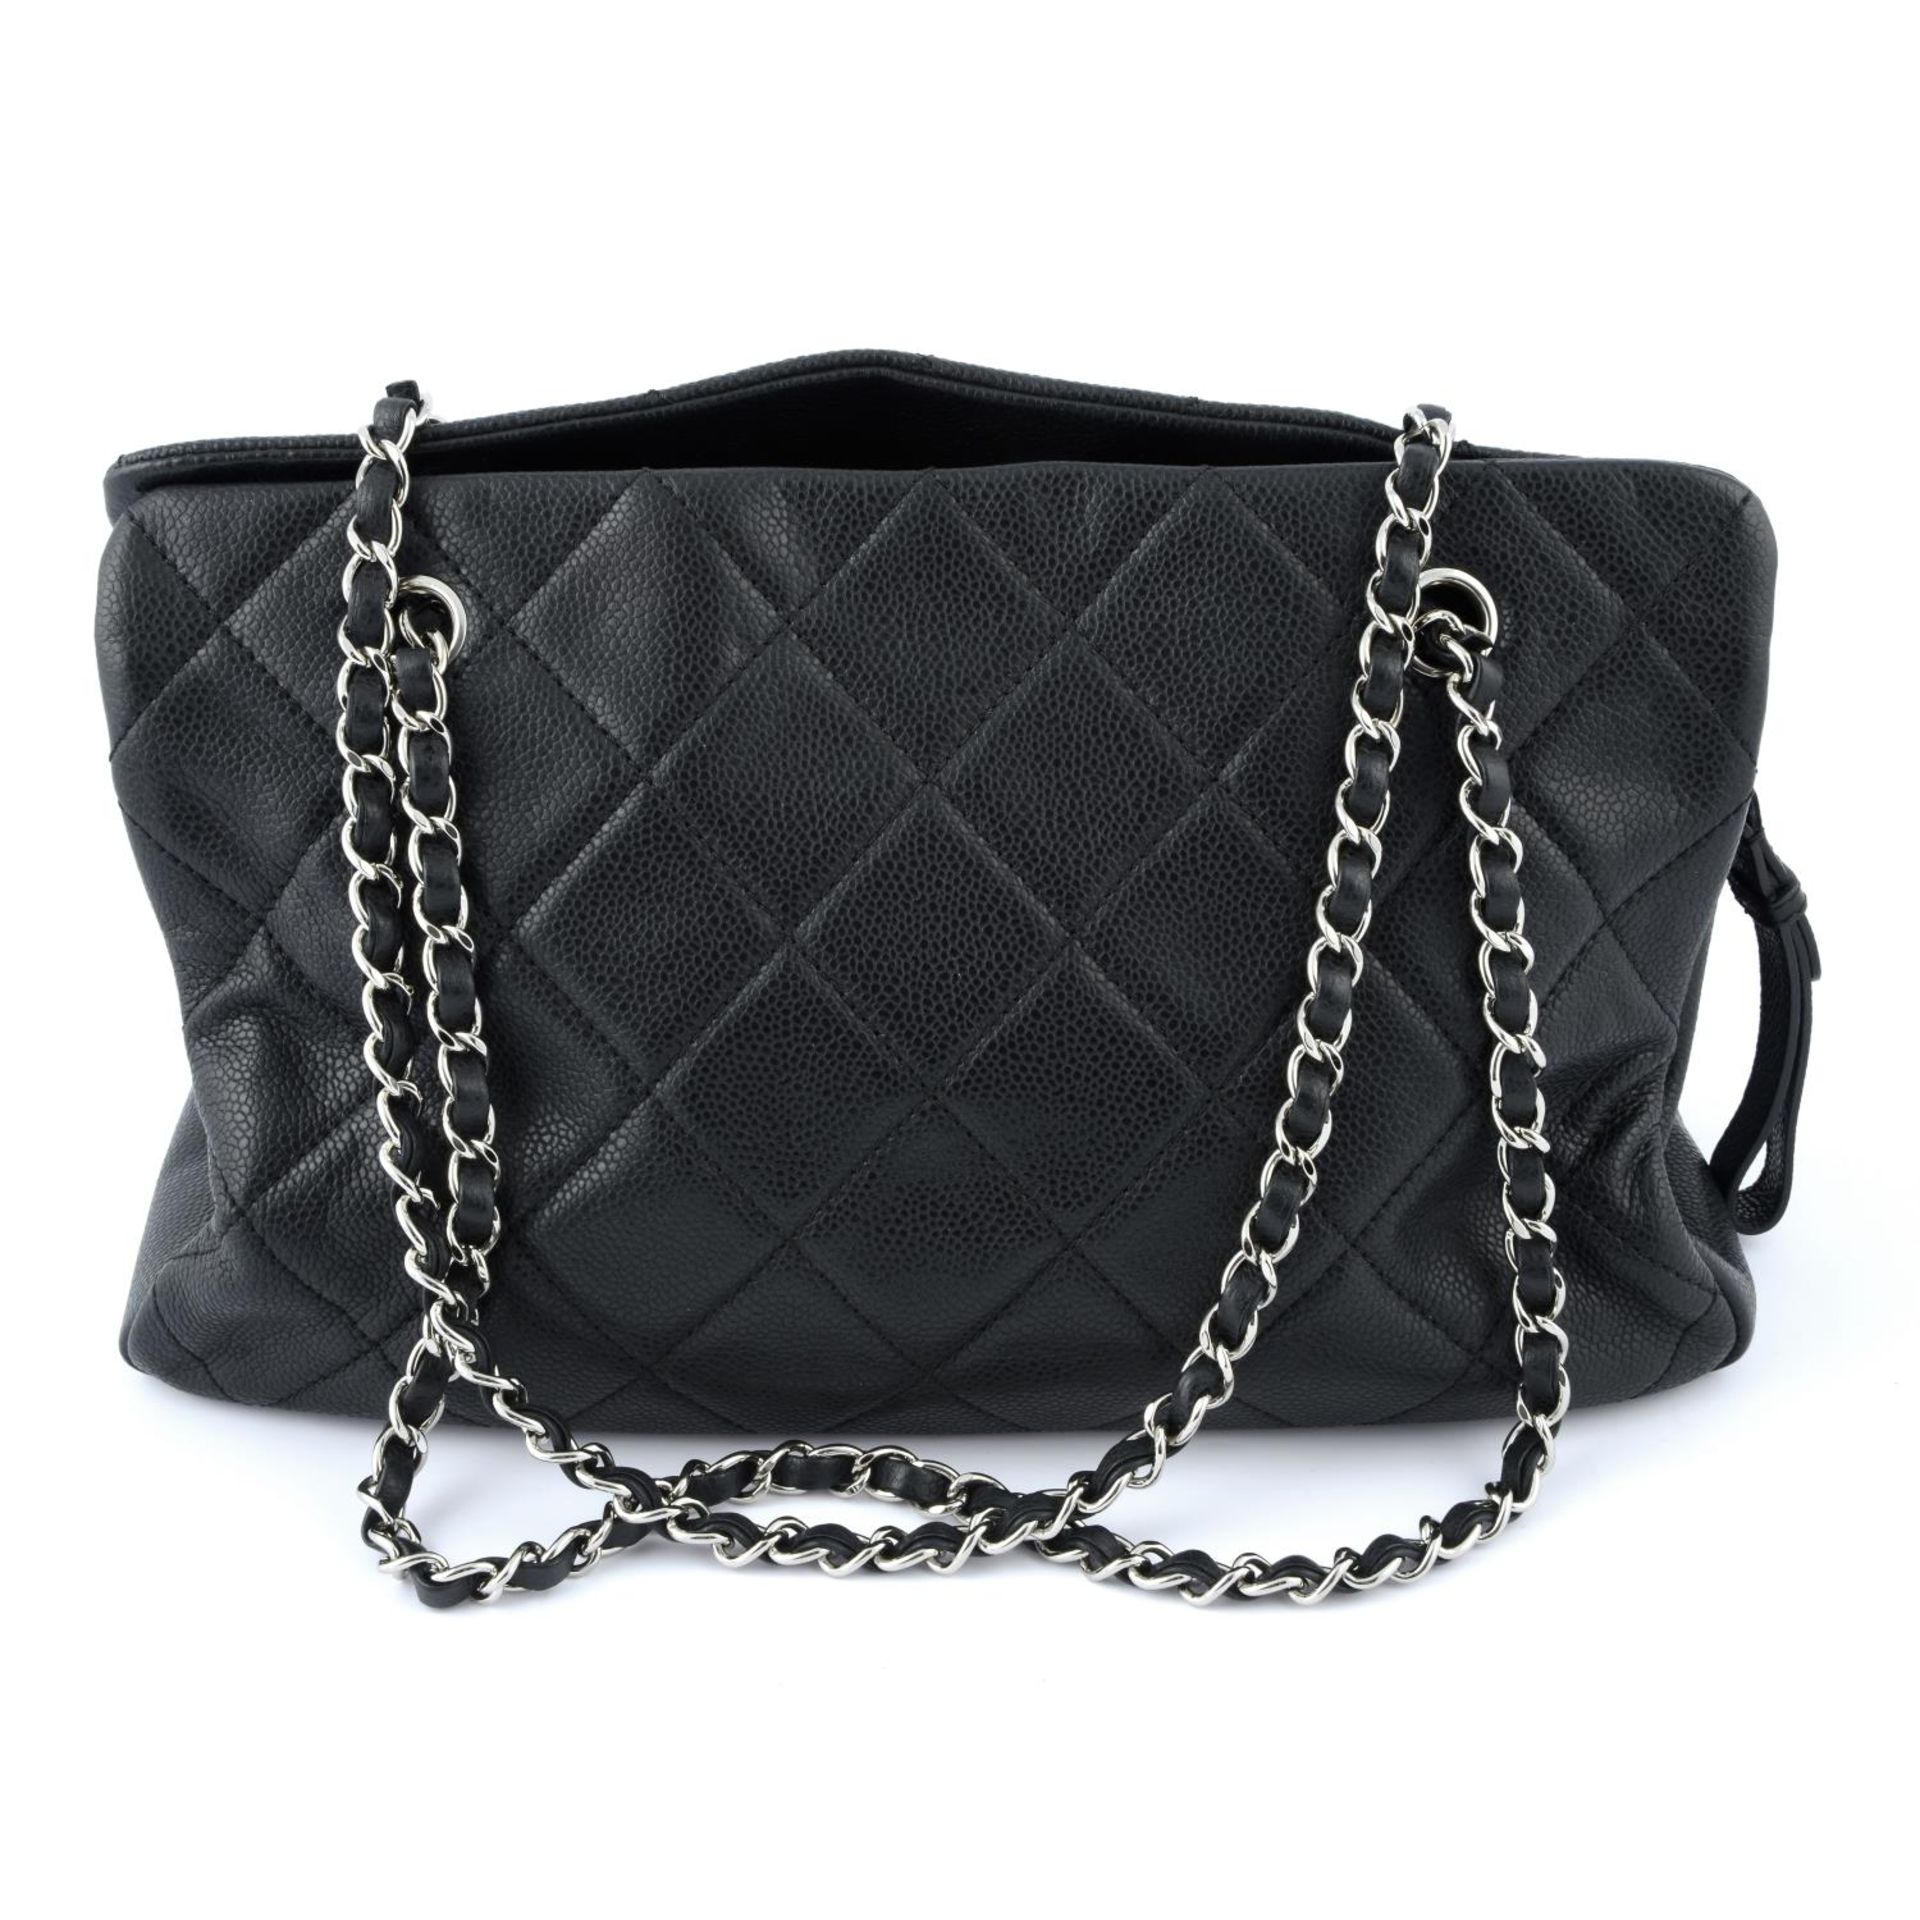 CHANEL - a quilted Shopping handbag. - Image 2 of 5